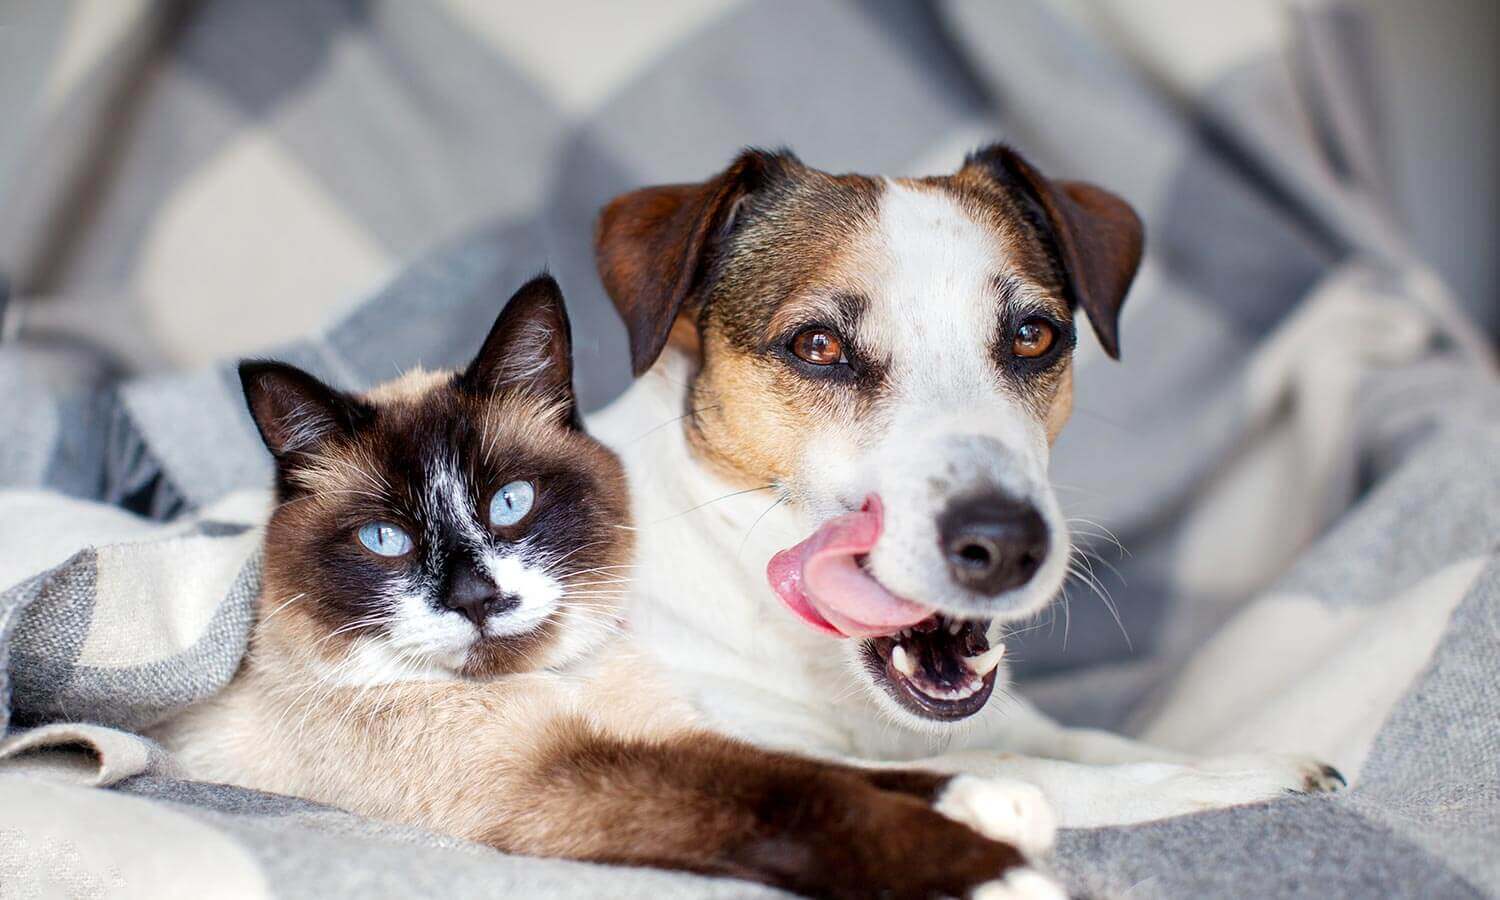 A dog licking its lips next to a cat